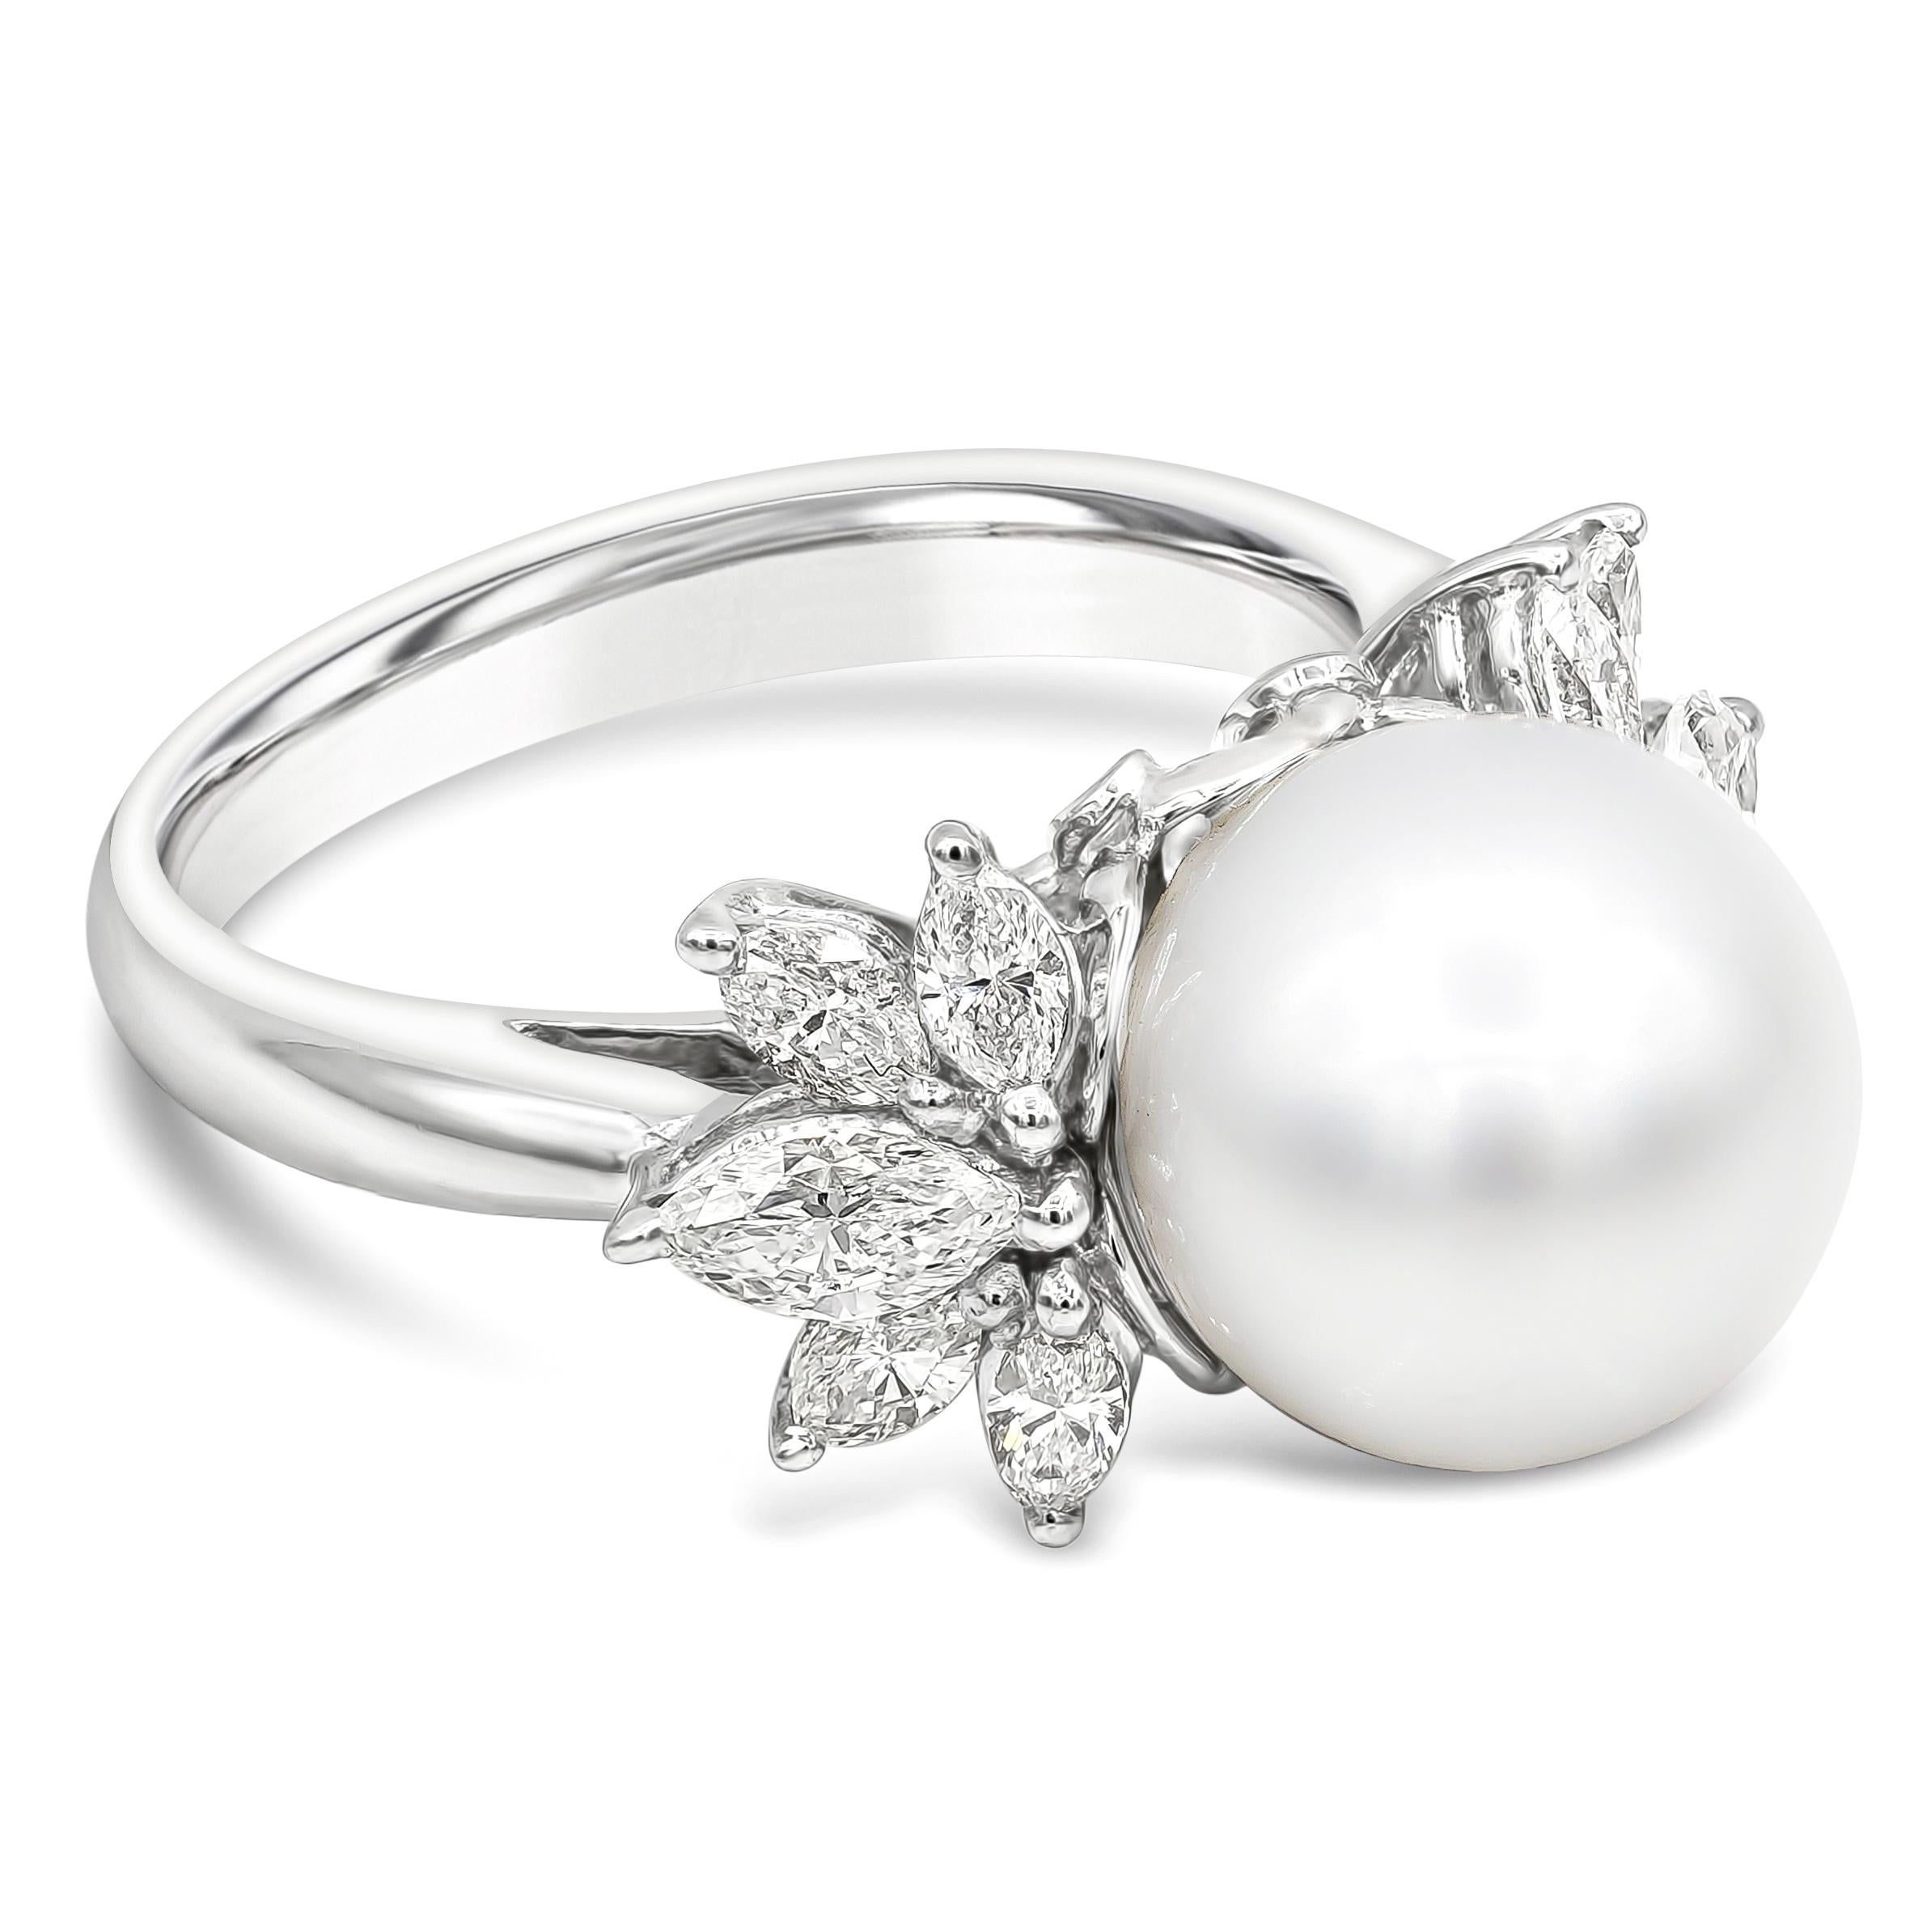 A beautiful and rare style of cocktail ring showcasing a vibrant pearl accented with 10 marquise cut diamonds weighing 0.87 carats total. Set in 18k white gold setting. Size 6.75 US resizable upon request.

Roman Malakov is a custom house,